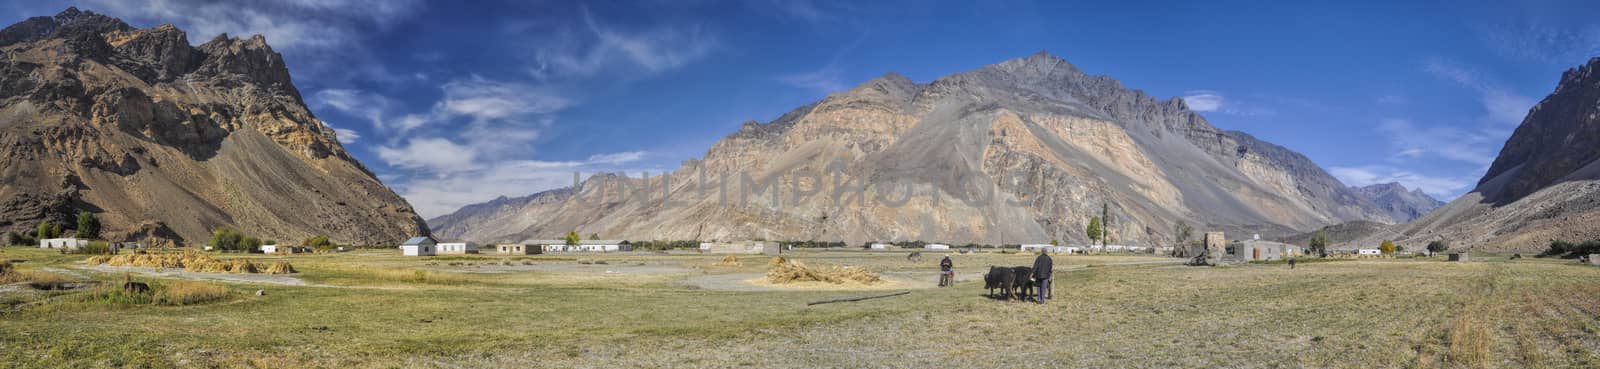 Scenic panorama of remote village with grain fields in Tajikistan on sunny day